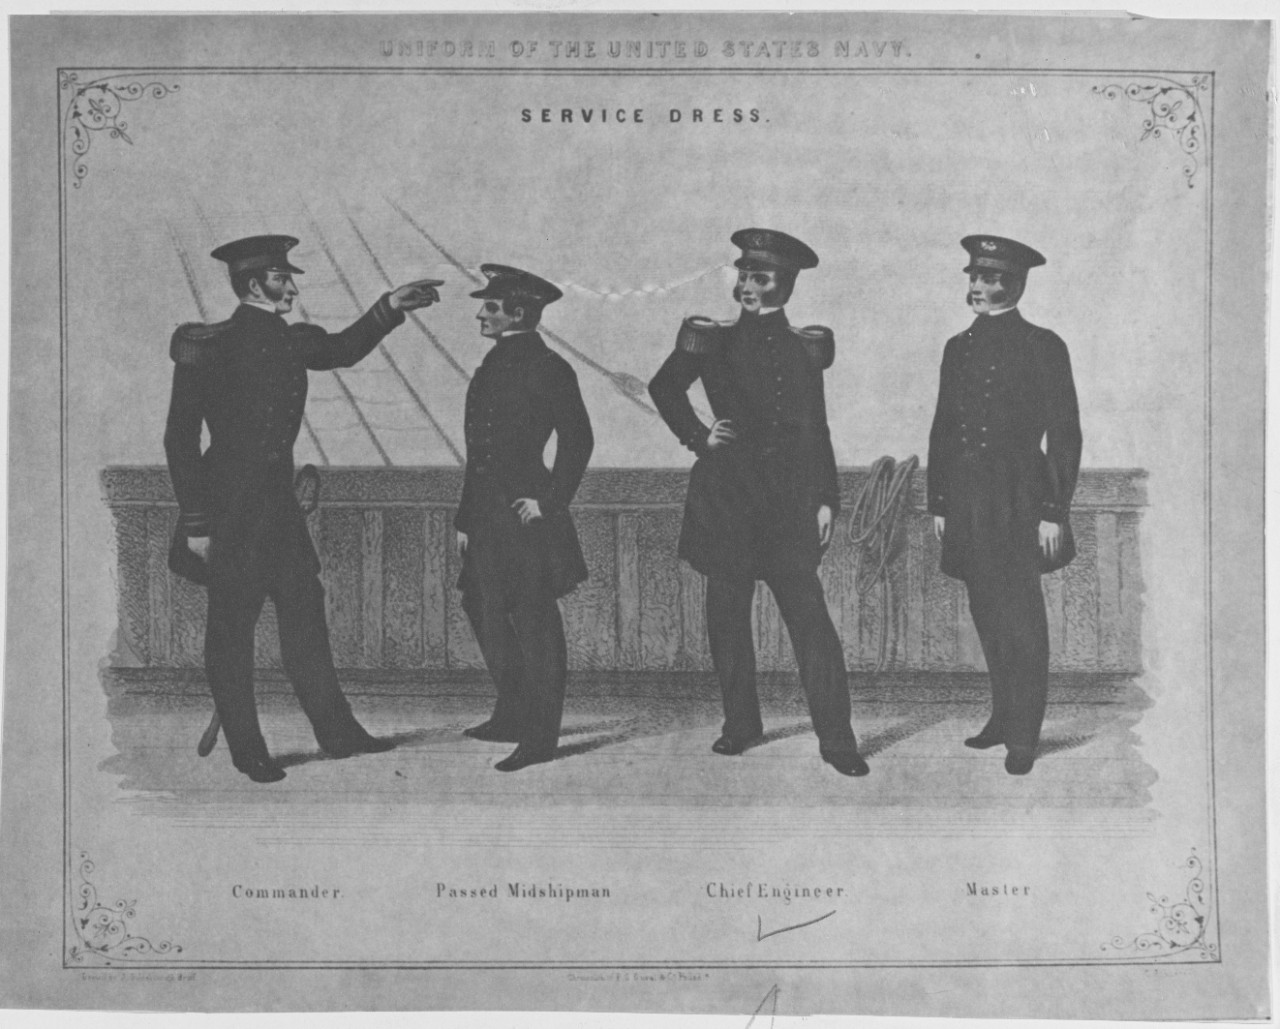 Uniforms of the United States Navy, 1852